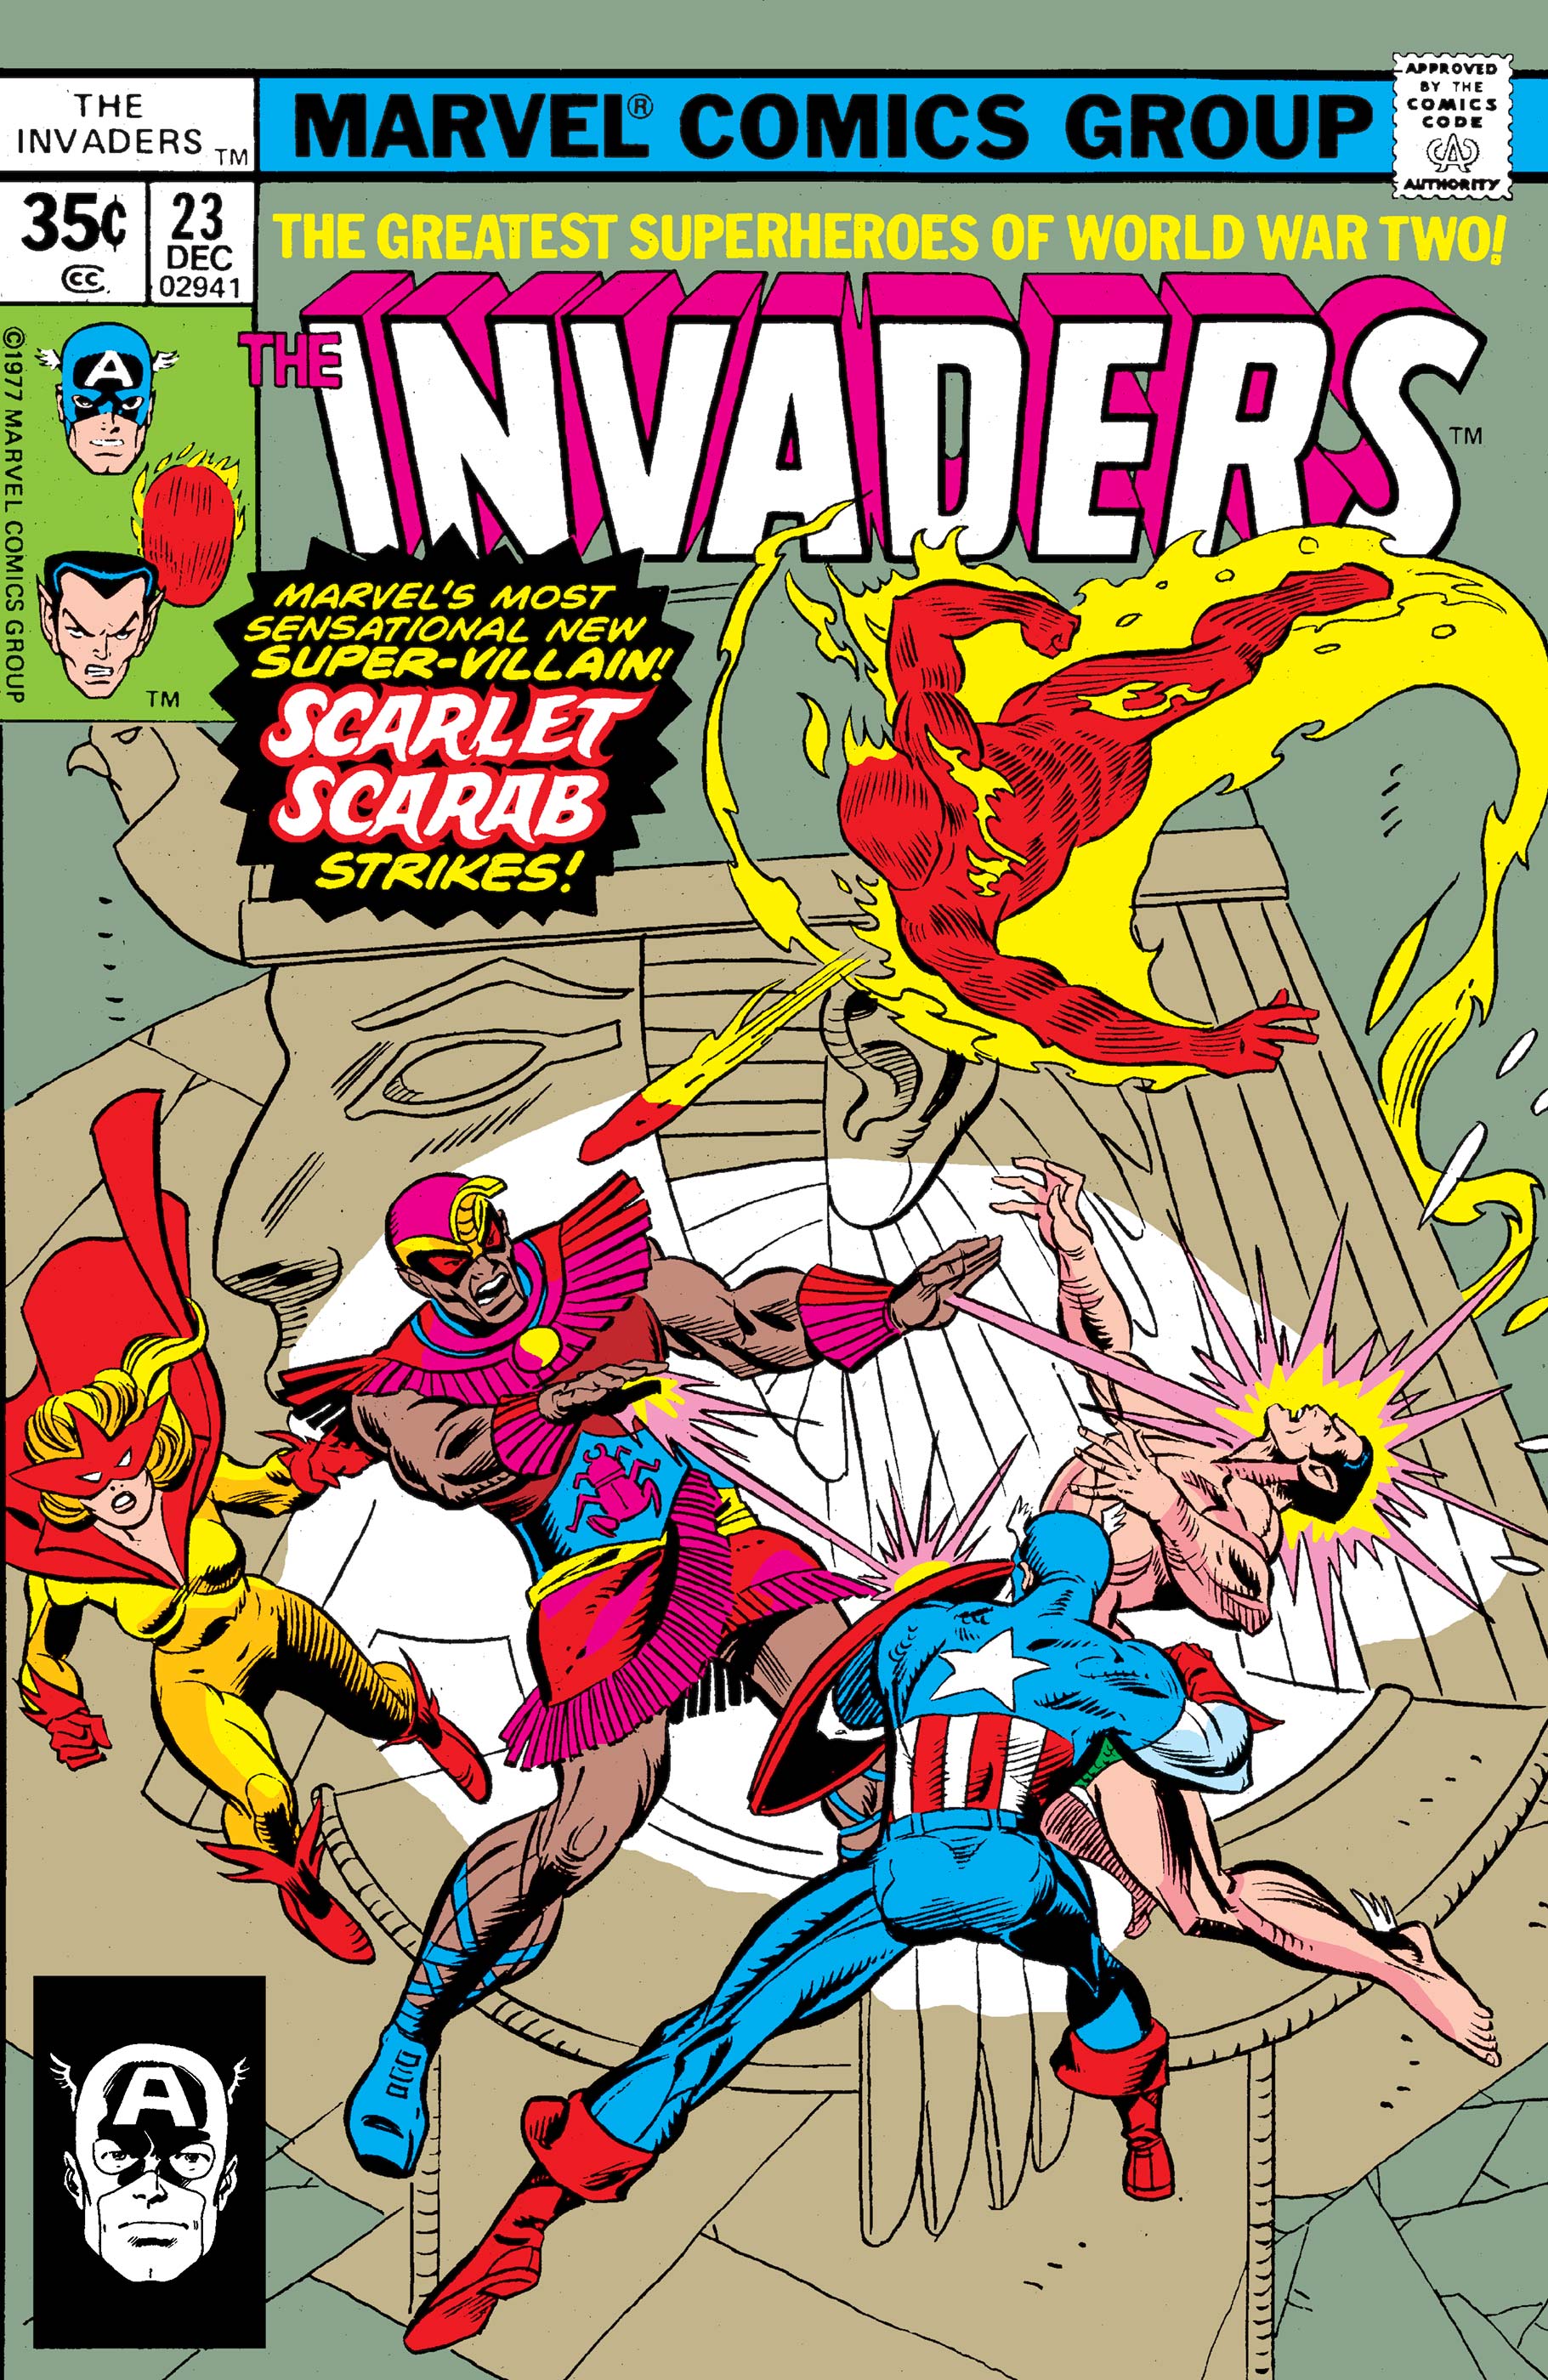 Invaders (1975) #23